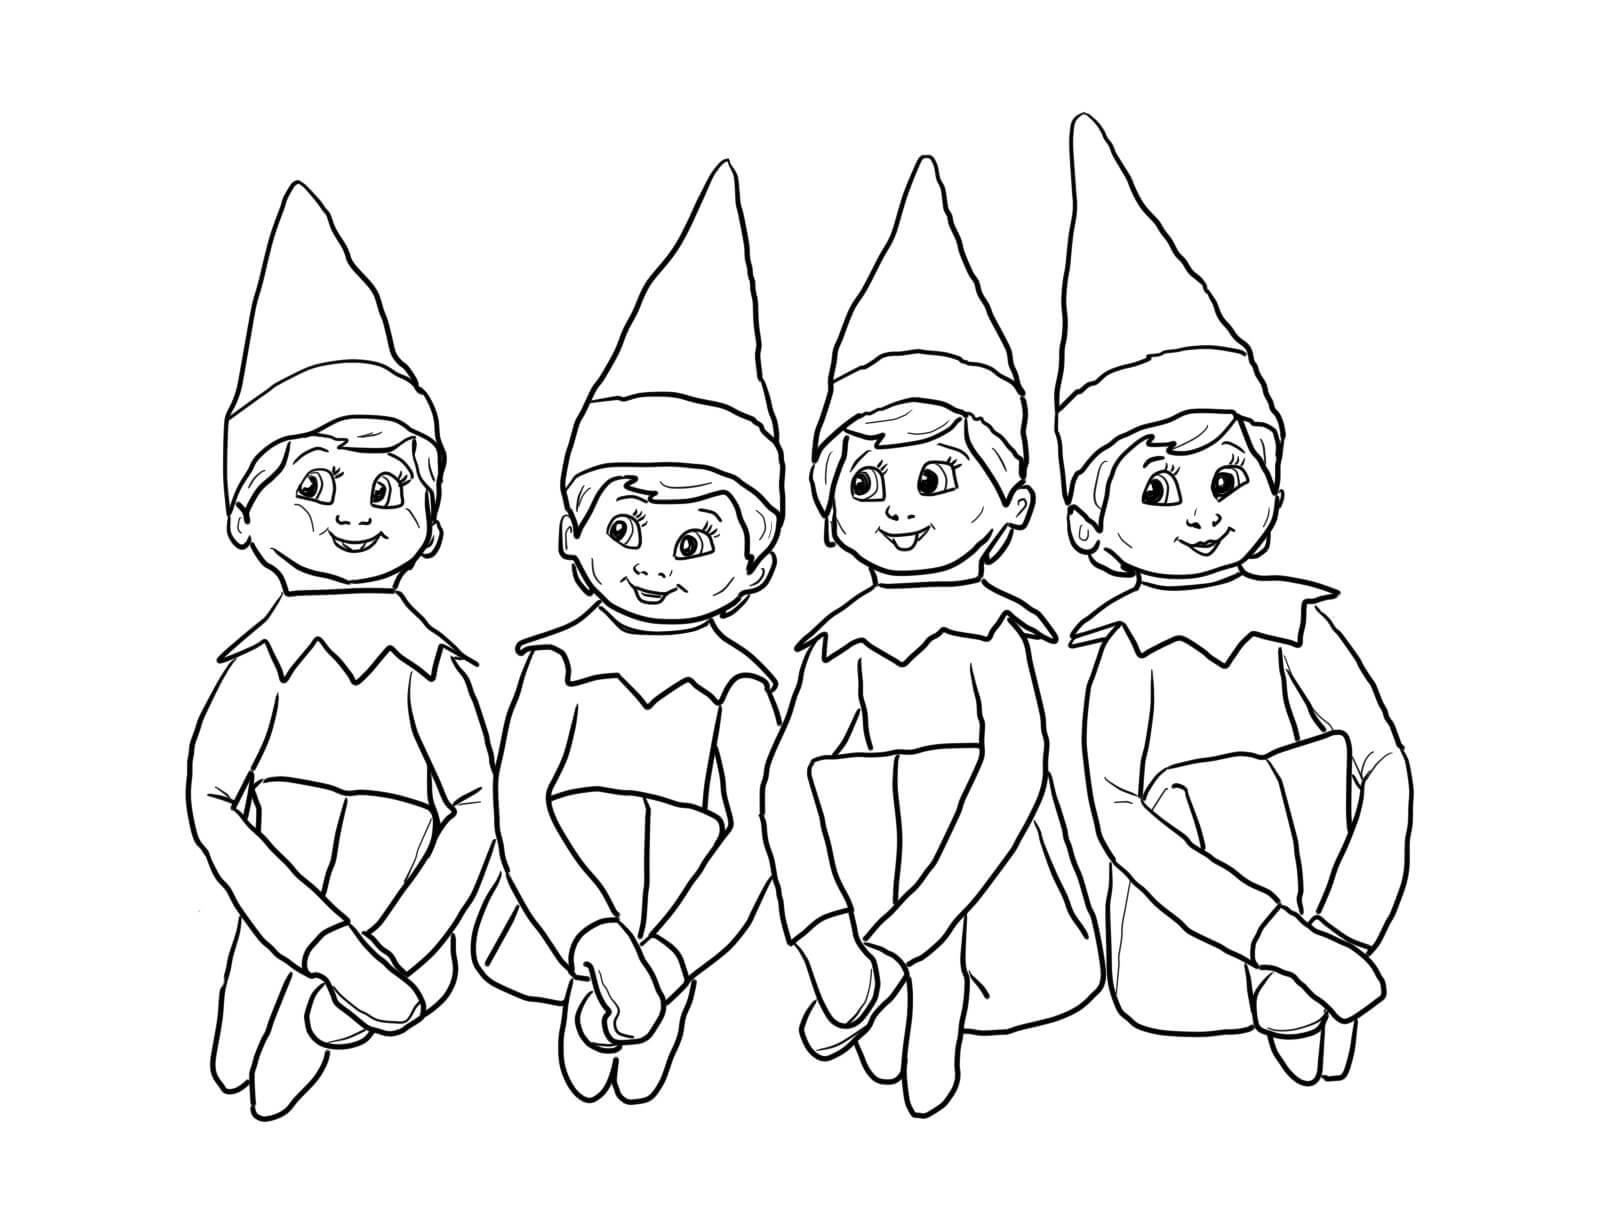 43+ Christmas Elves Colorin Santa sleigh coloring page at getcolorings.com